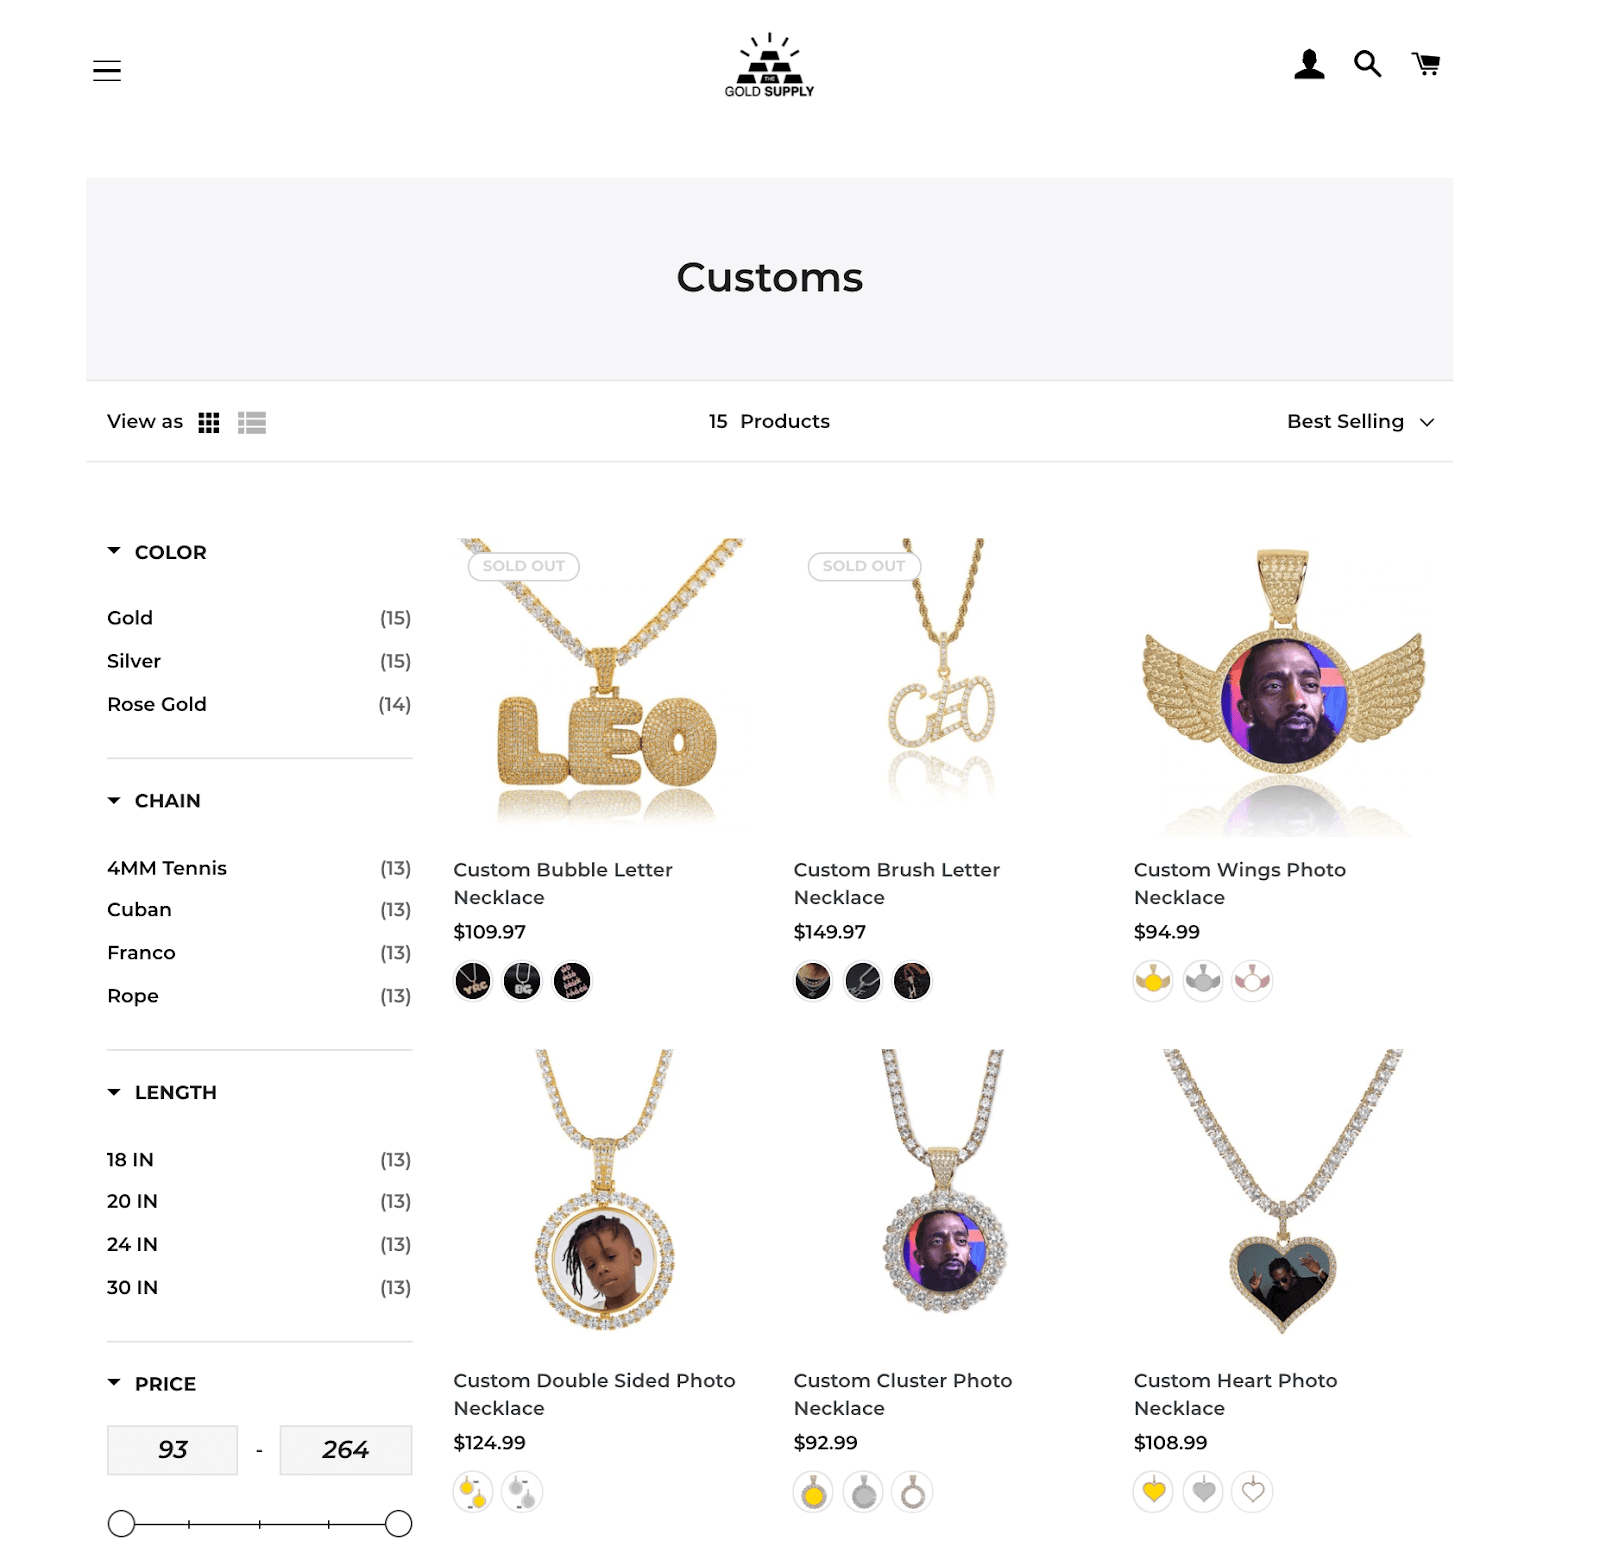 Valentine’s Day Gift Guide–A screenshot from The Gold Supply’s Custom product page showing 6 different necklaces with names or images on them. 